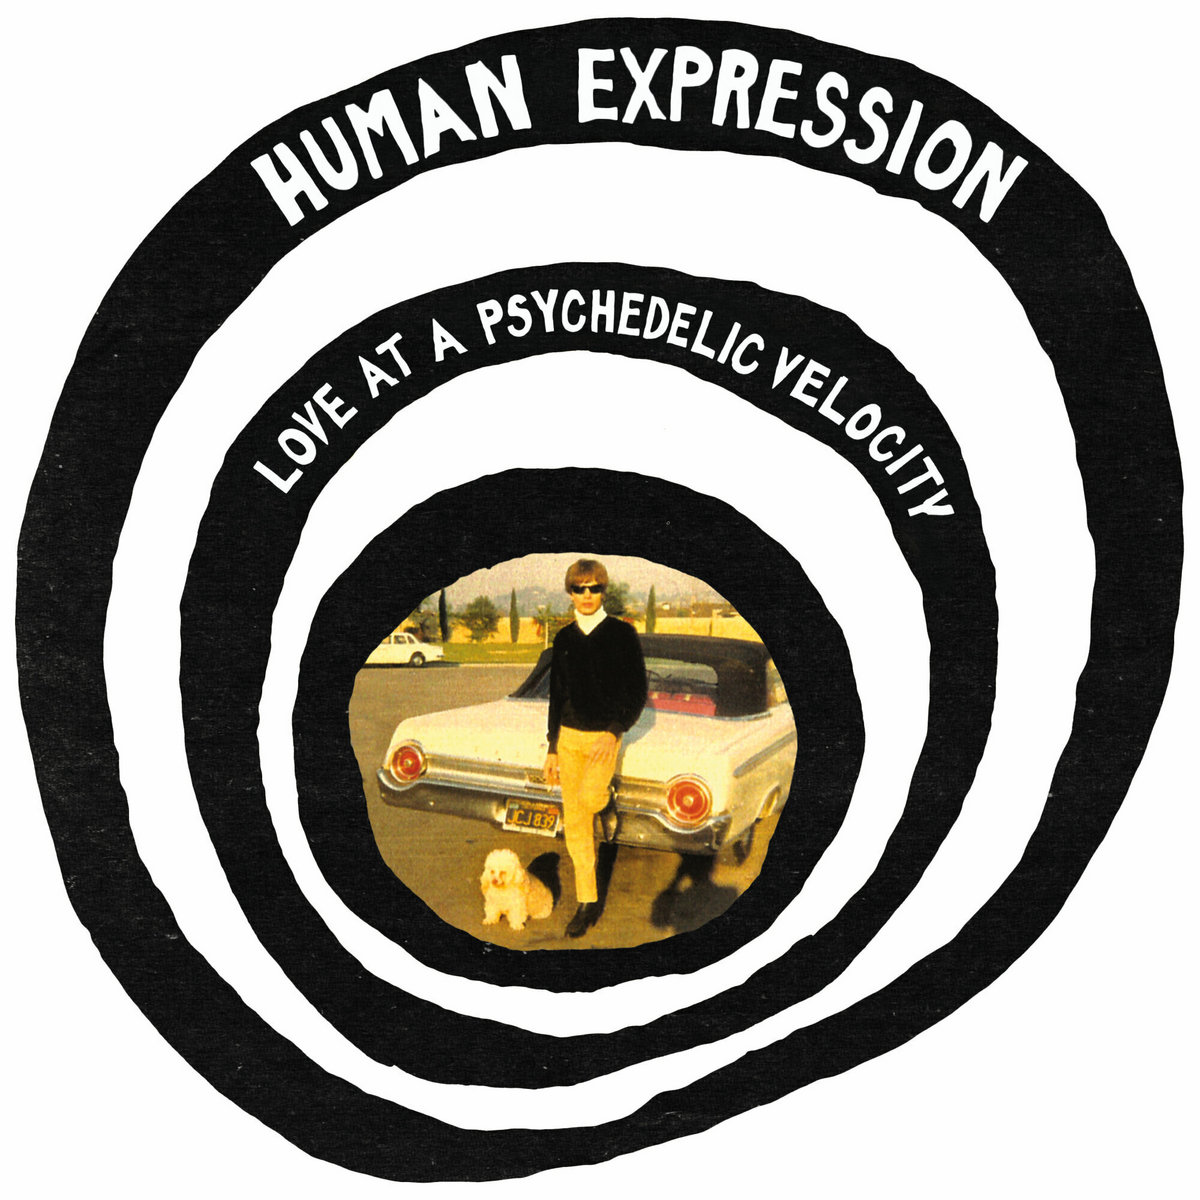 HUMAN EXPRESSON – ‘Love At Psychedelic Velocity’ cover album